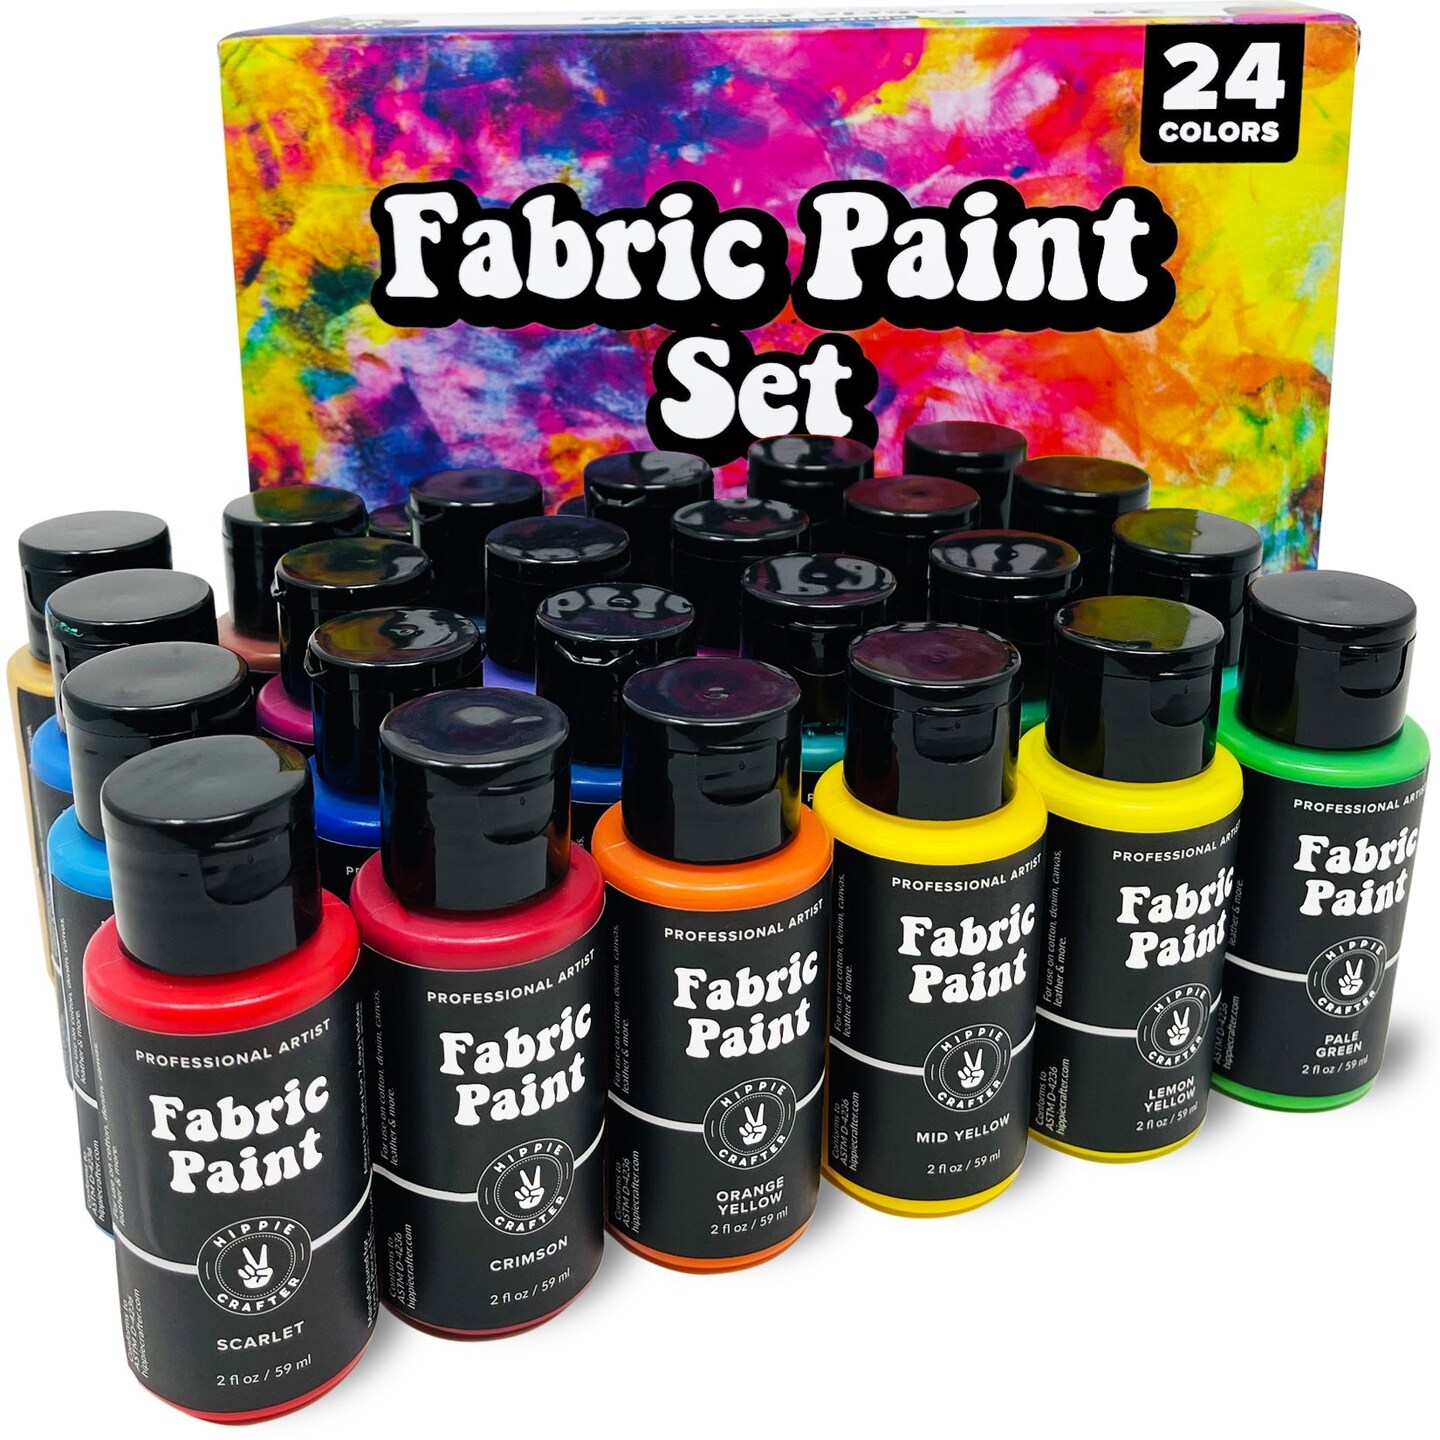 Tulip® Glitter™ Assorted Colors Dimensional Fabric Paint - Set of 6 (1  Set(s))